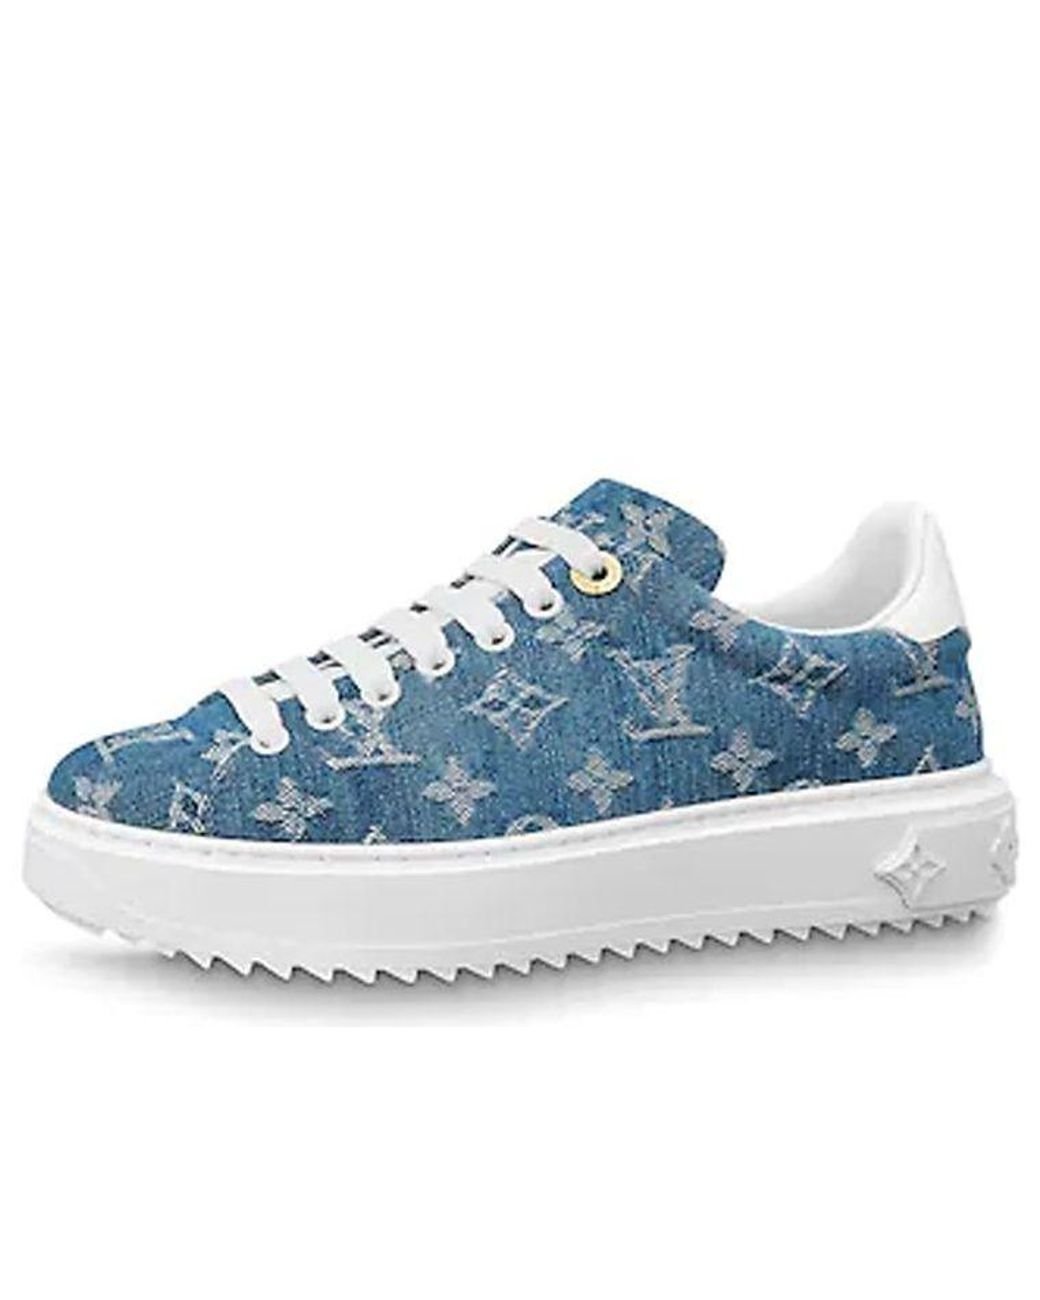 Louis Vuitton, Shoes, Time Out Sneakers